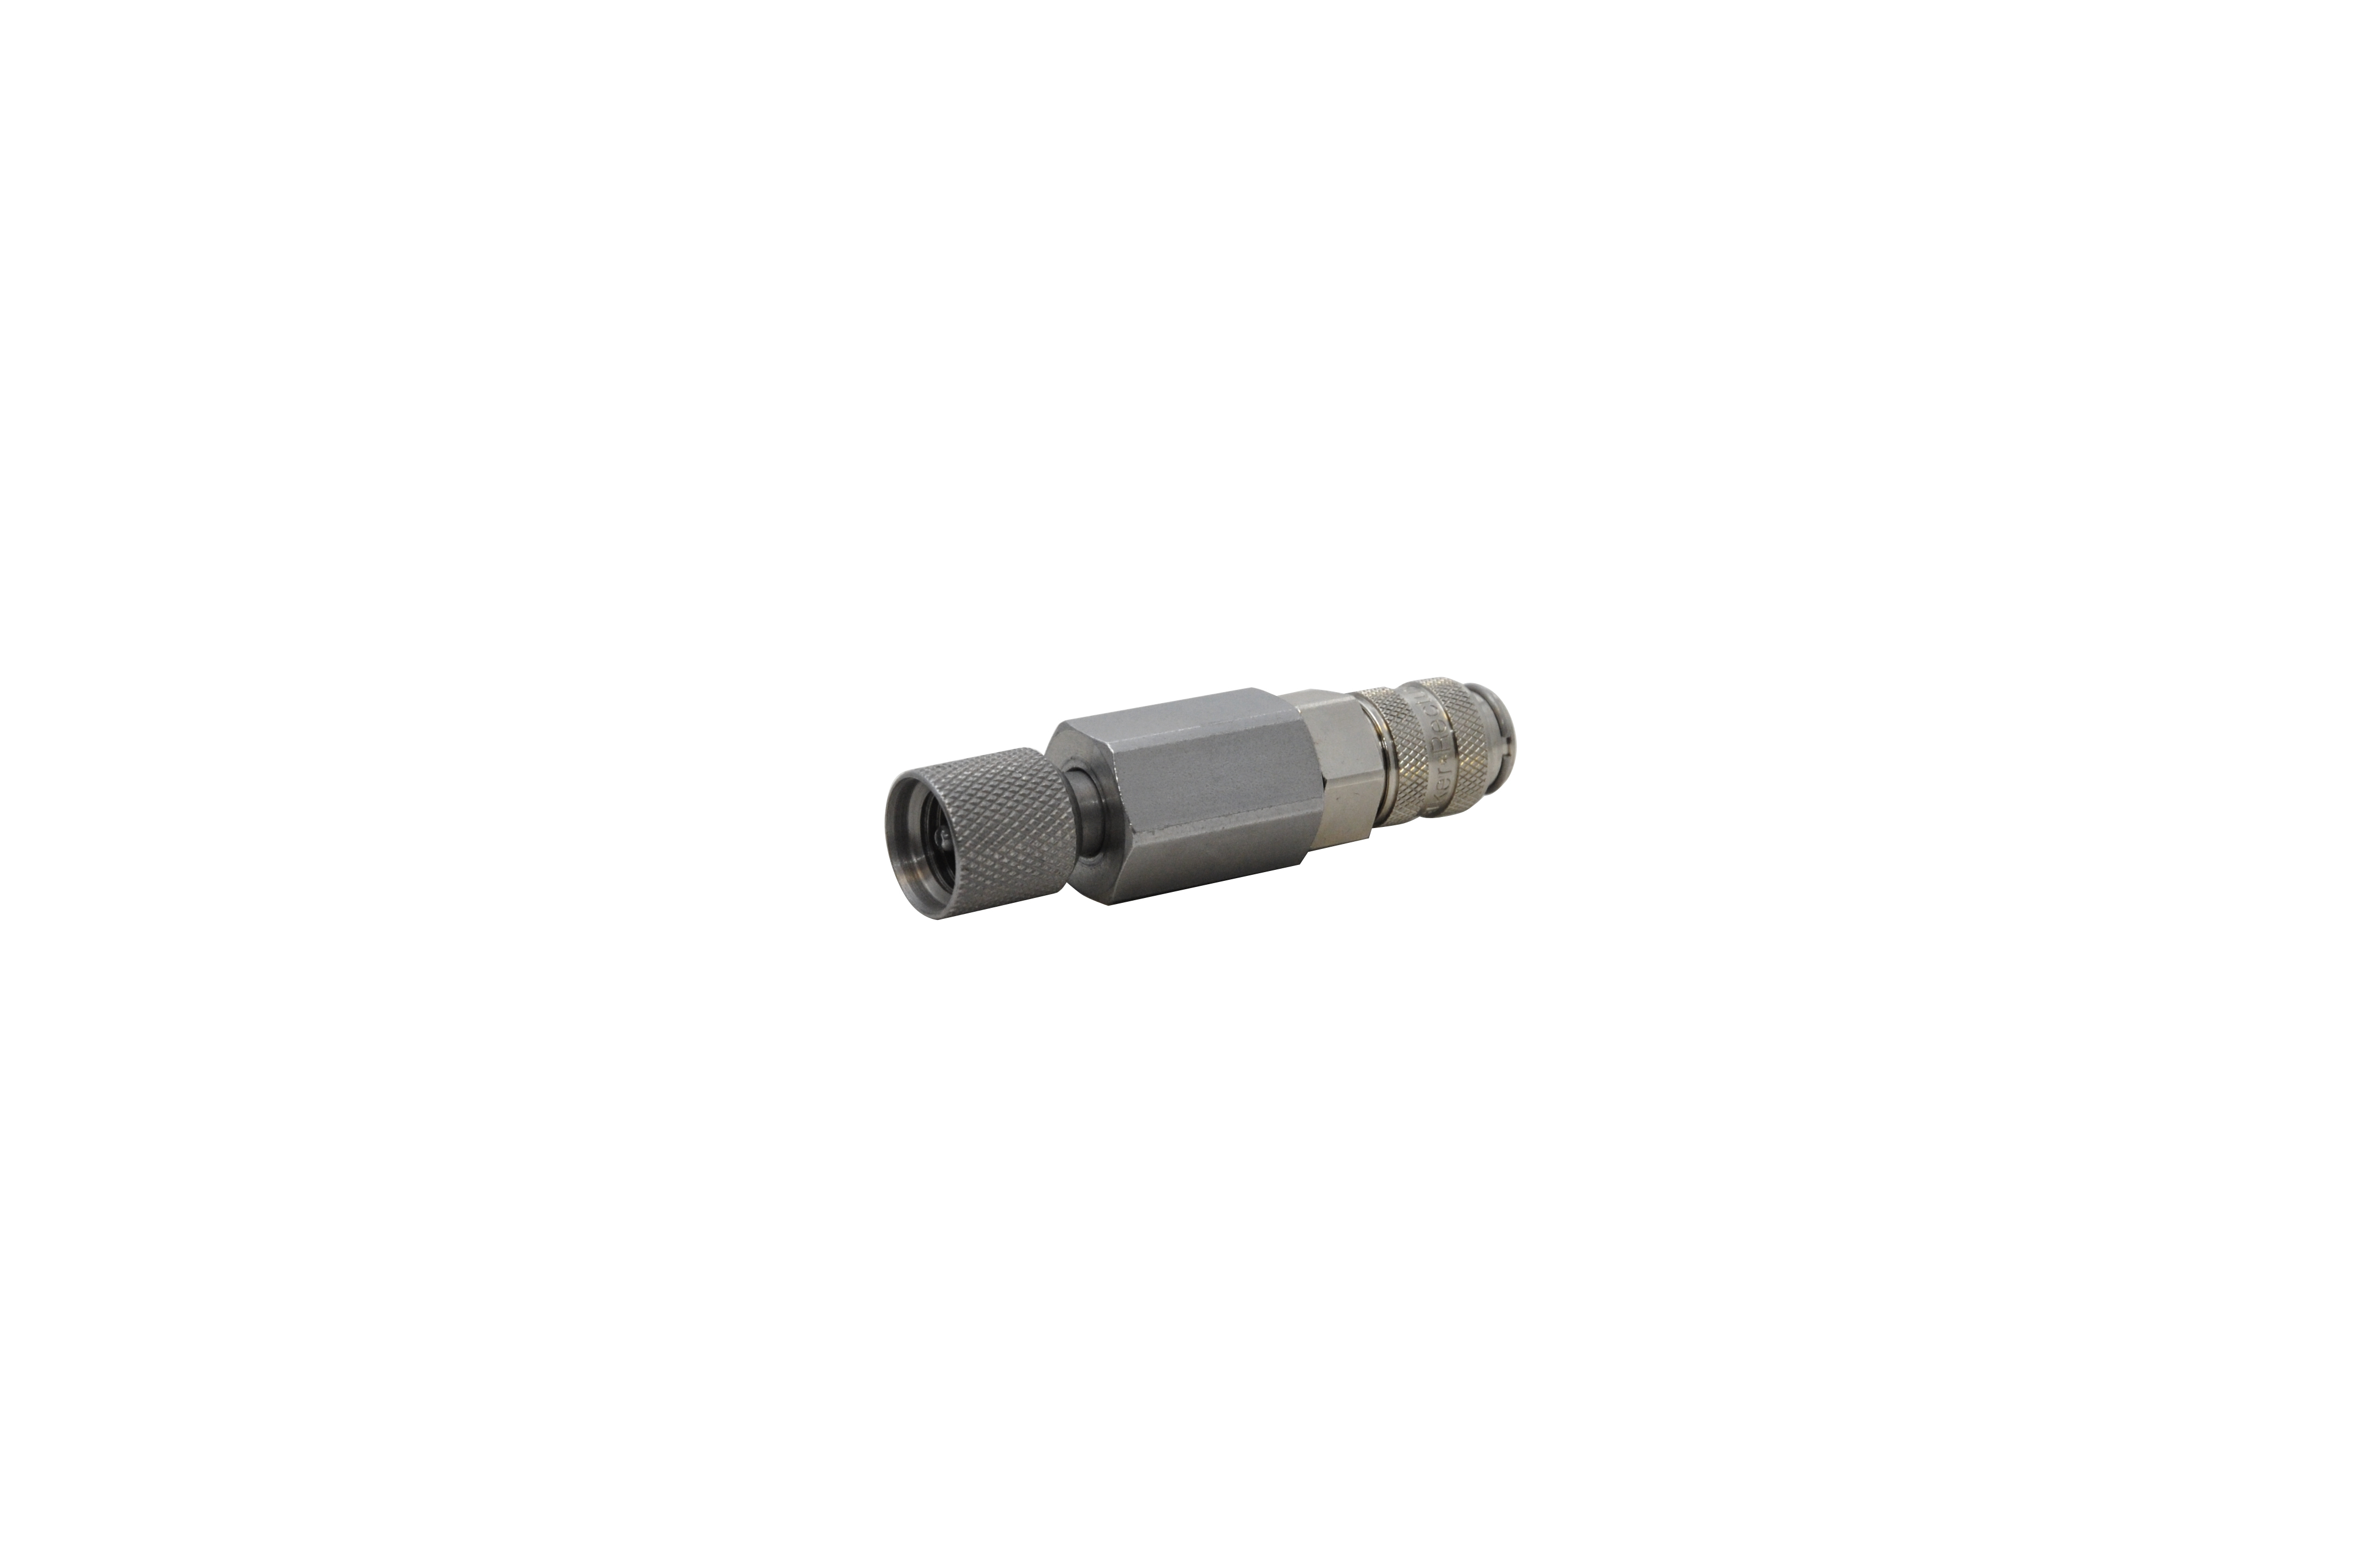 Adapter 1215 - coupling S 21